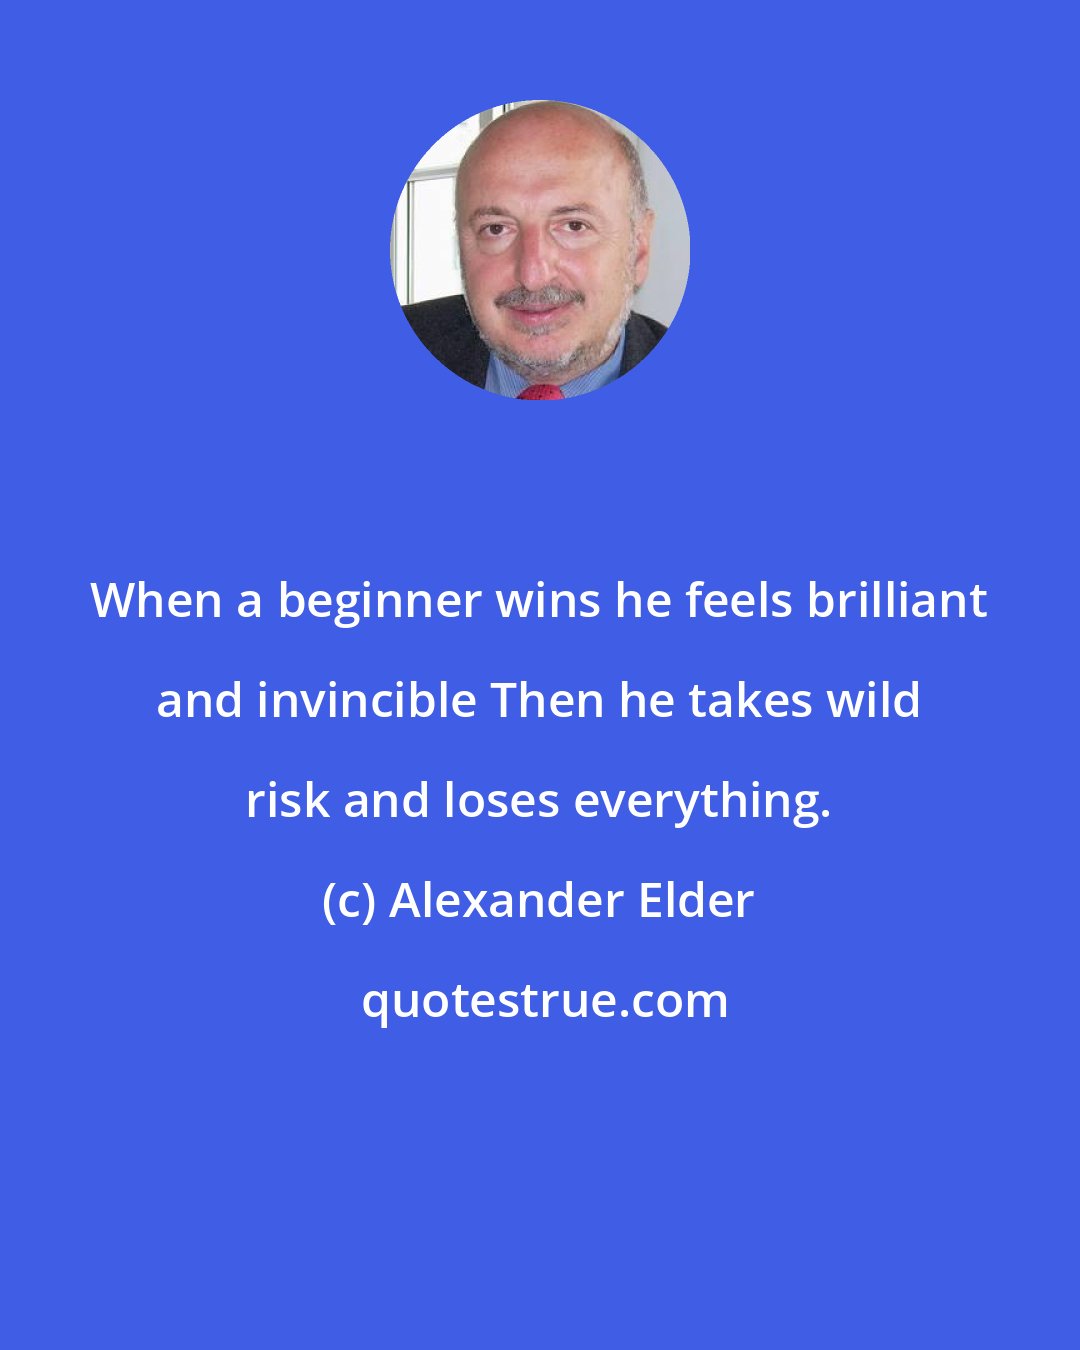 Alexander Elder: When a beginner wins he feels brilliant and invincible Then he takes wild risk and loses everything.